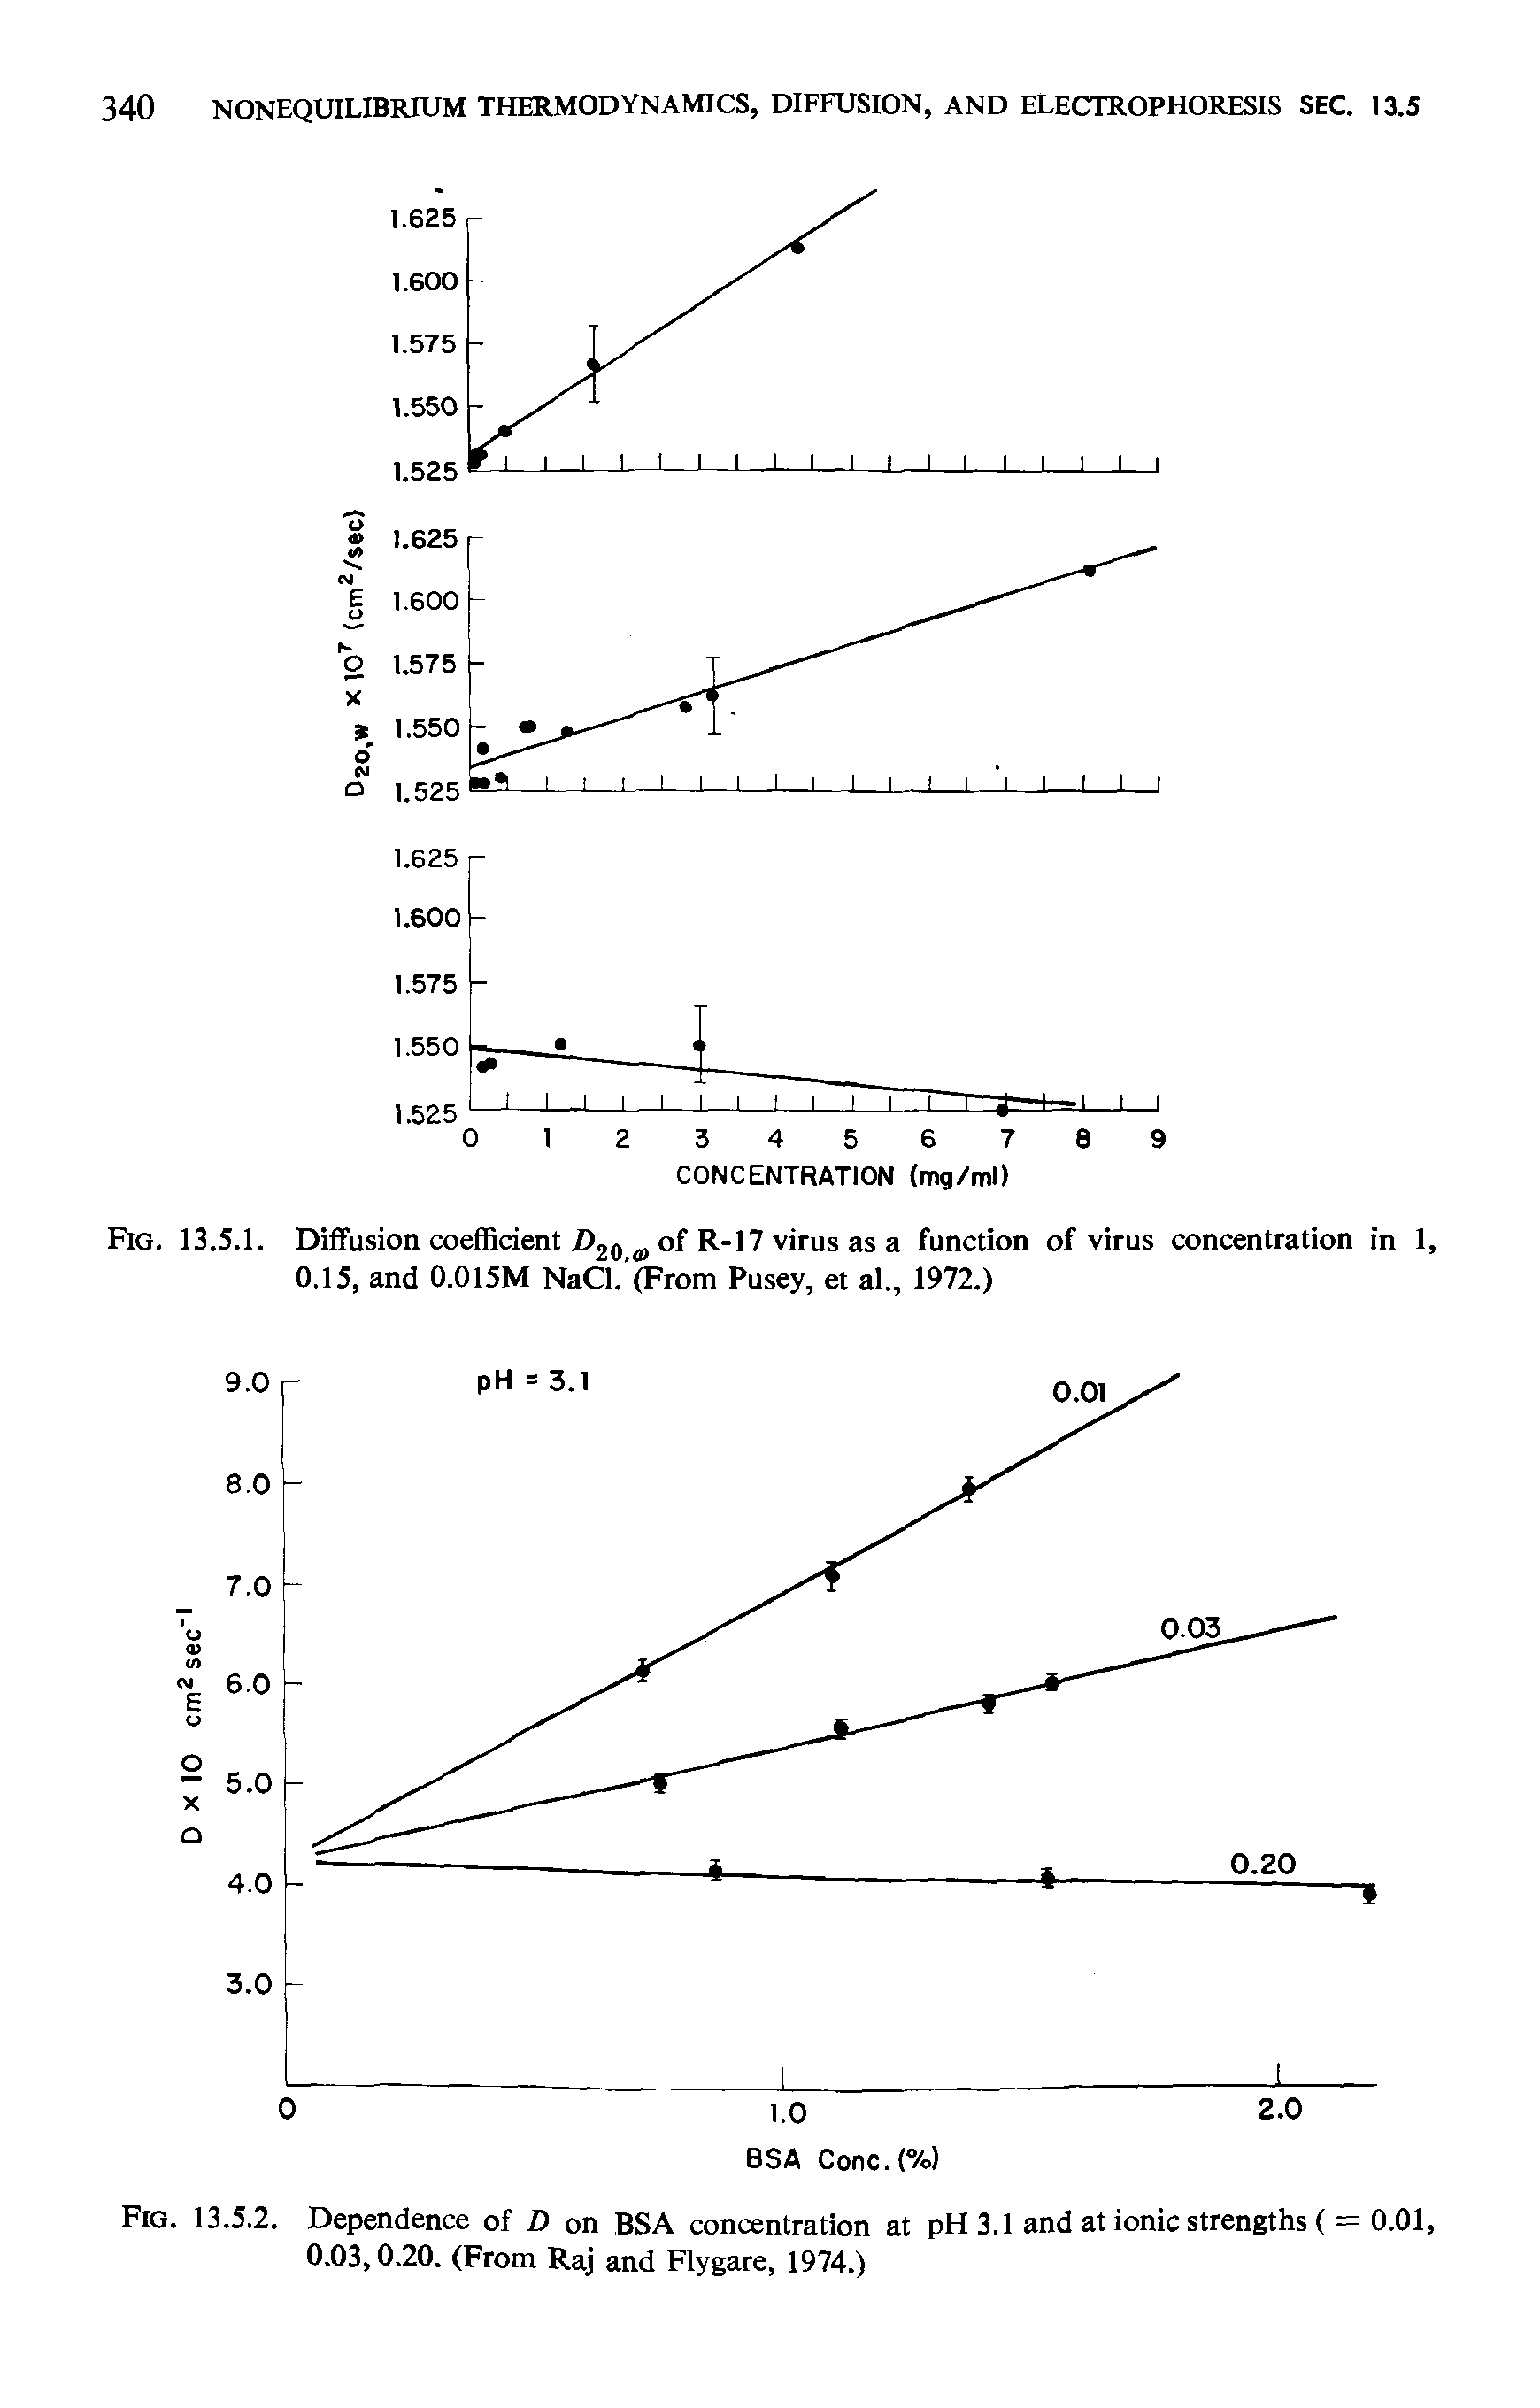 Fig. 13.5.1. Diffusion coefficient Z>2 0 of R-17 virus as a function of virus concentration in 1, 0.15, and 0.015M NaCl. (From Pusey, et al., 1972.)...